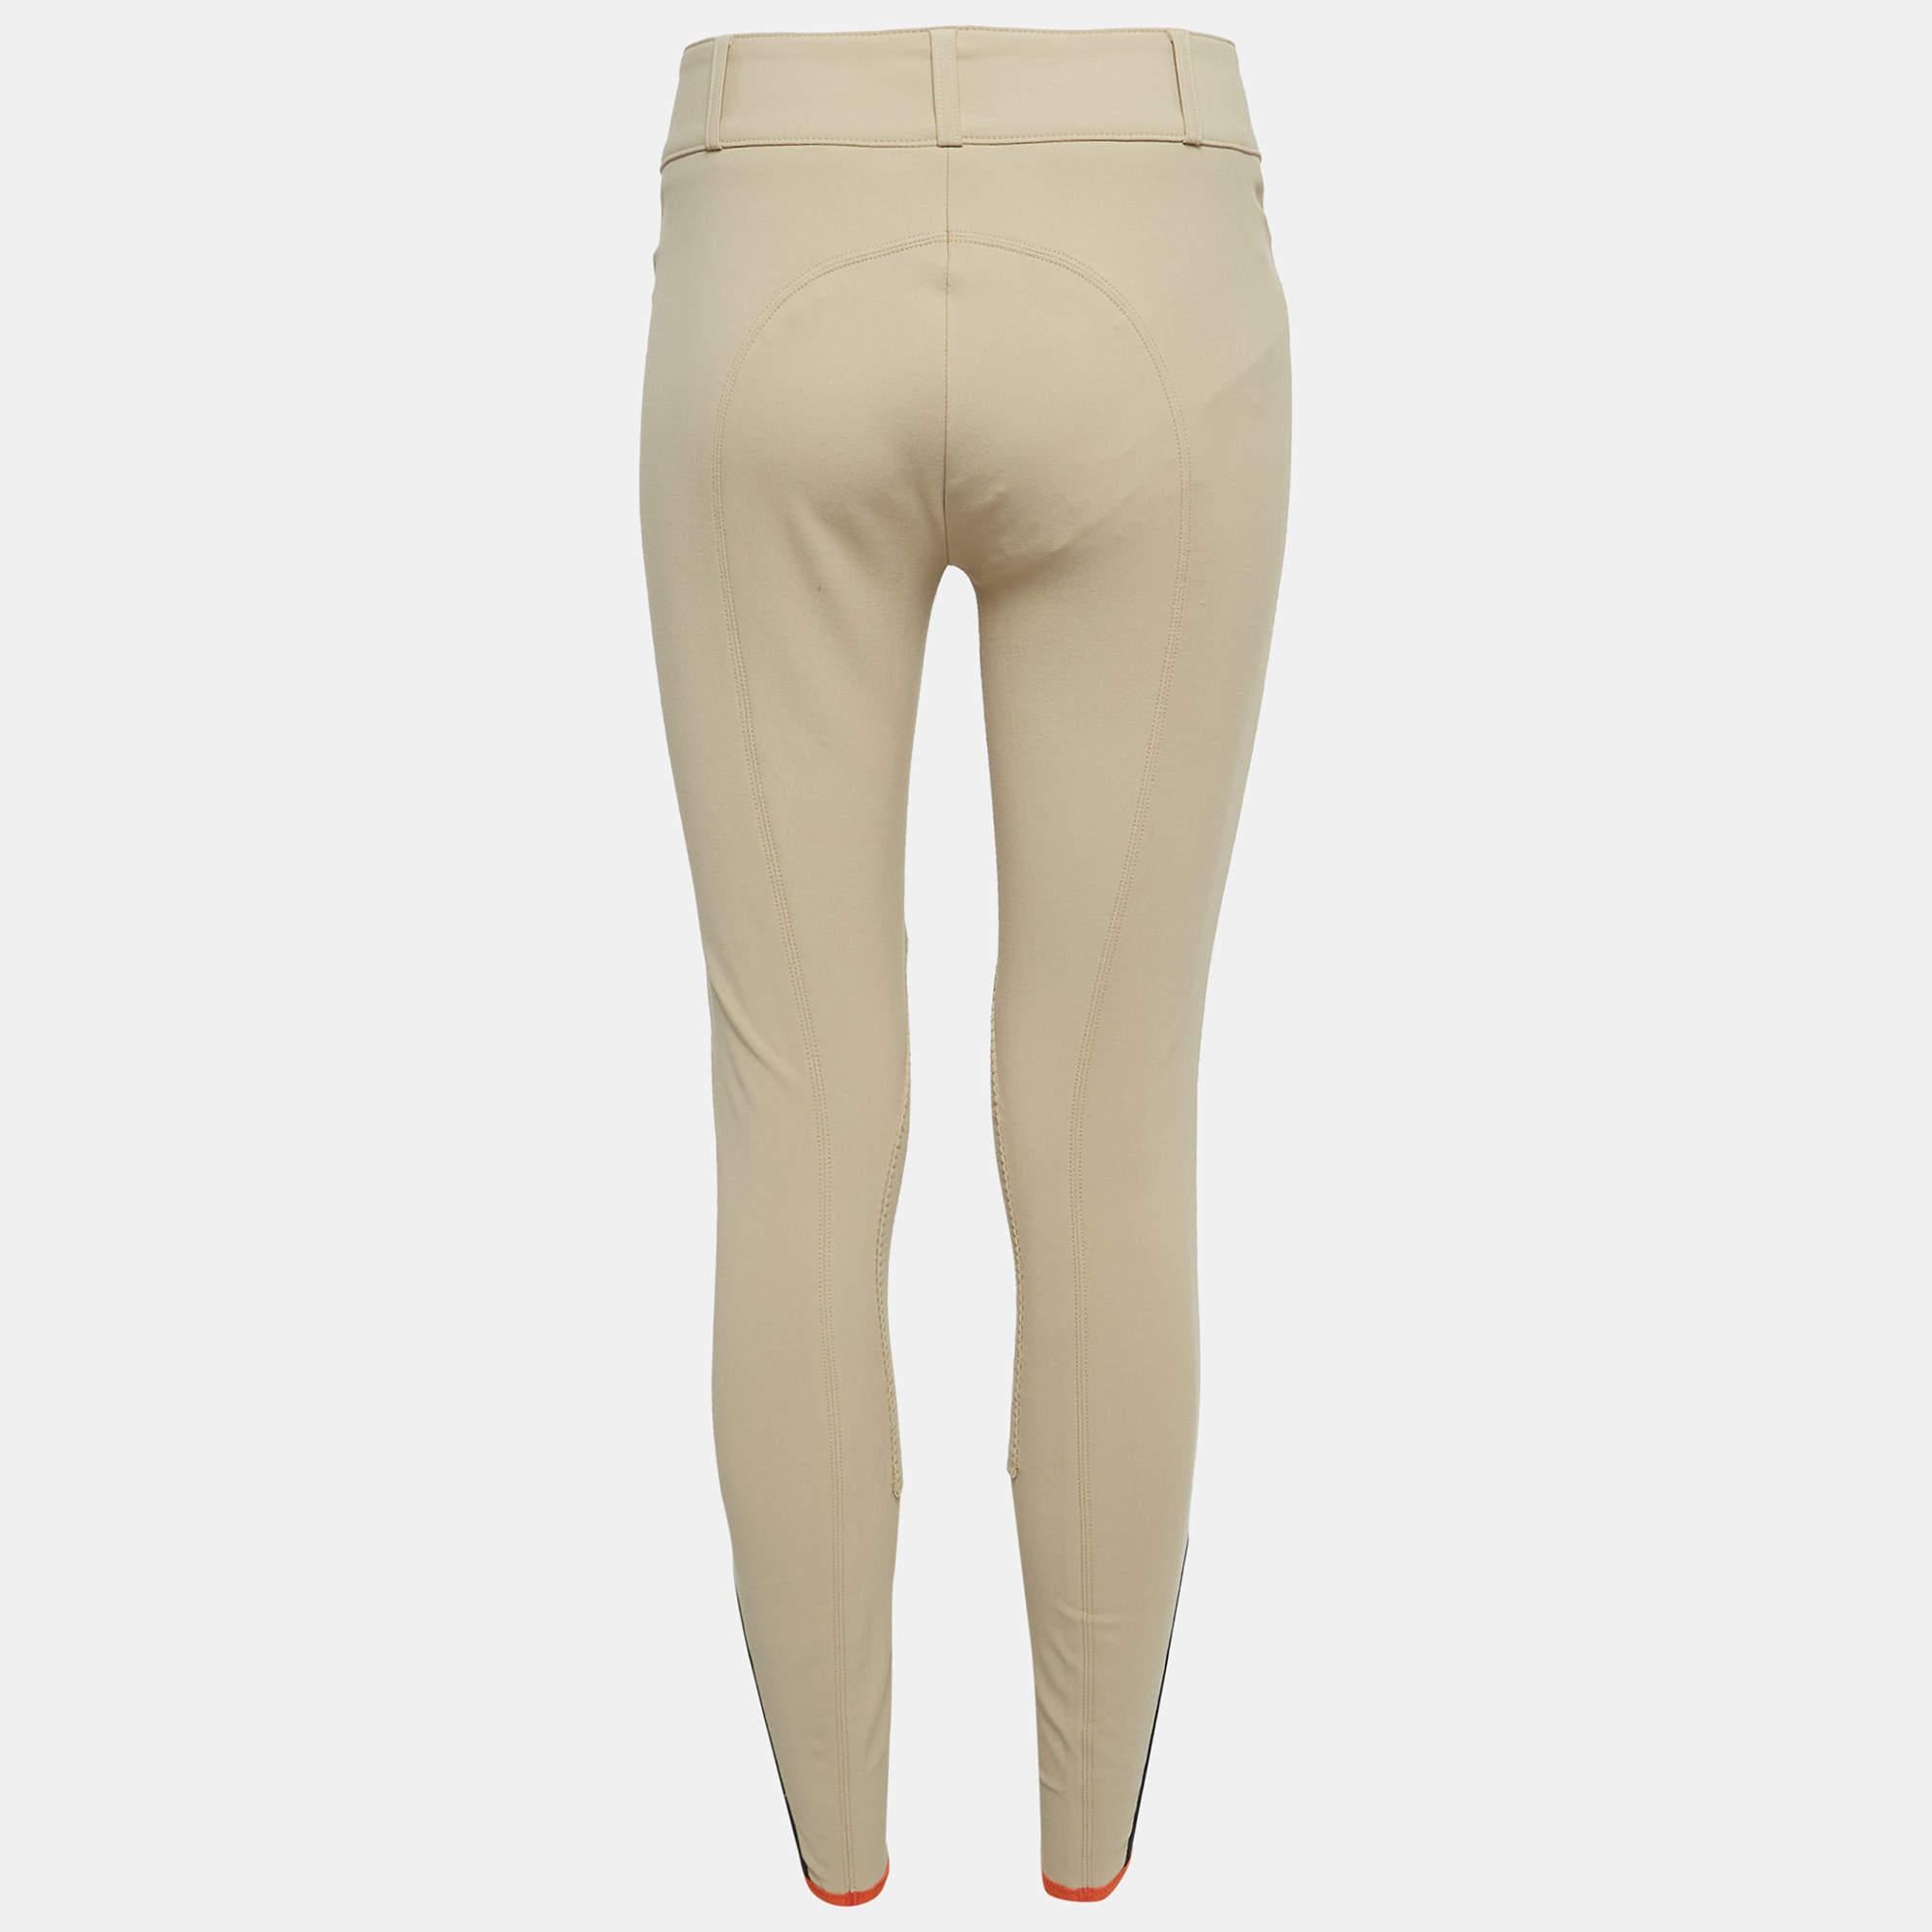 How stylish and classy are these Hermès breeches! Made from quality fabrics and styled into a great fit, complement these pants with a chic crop top.

